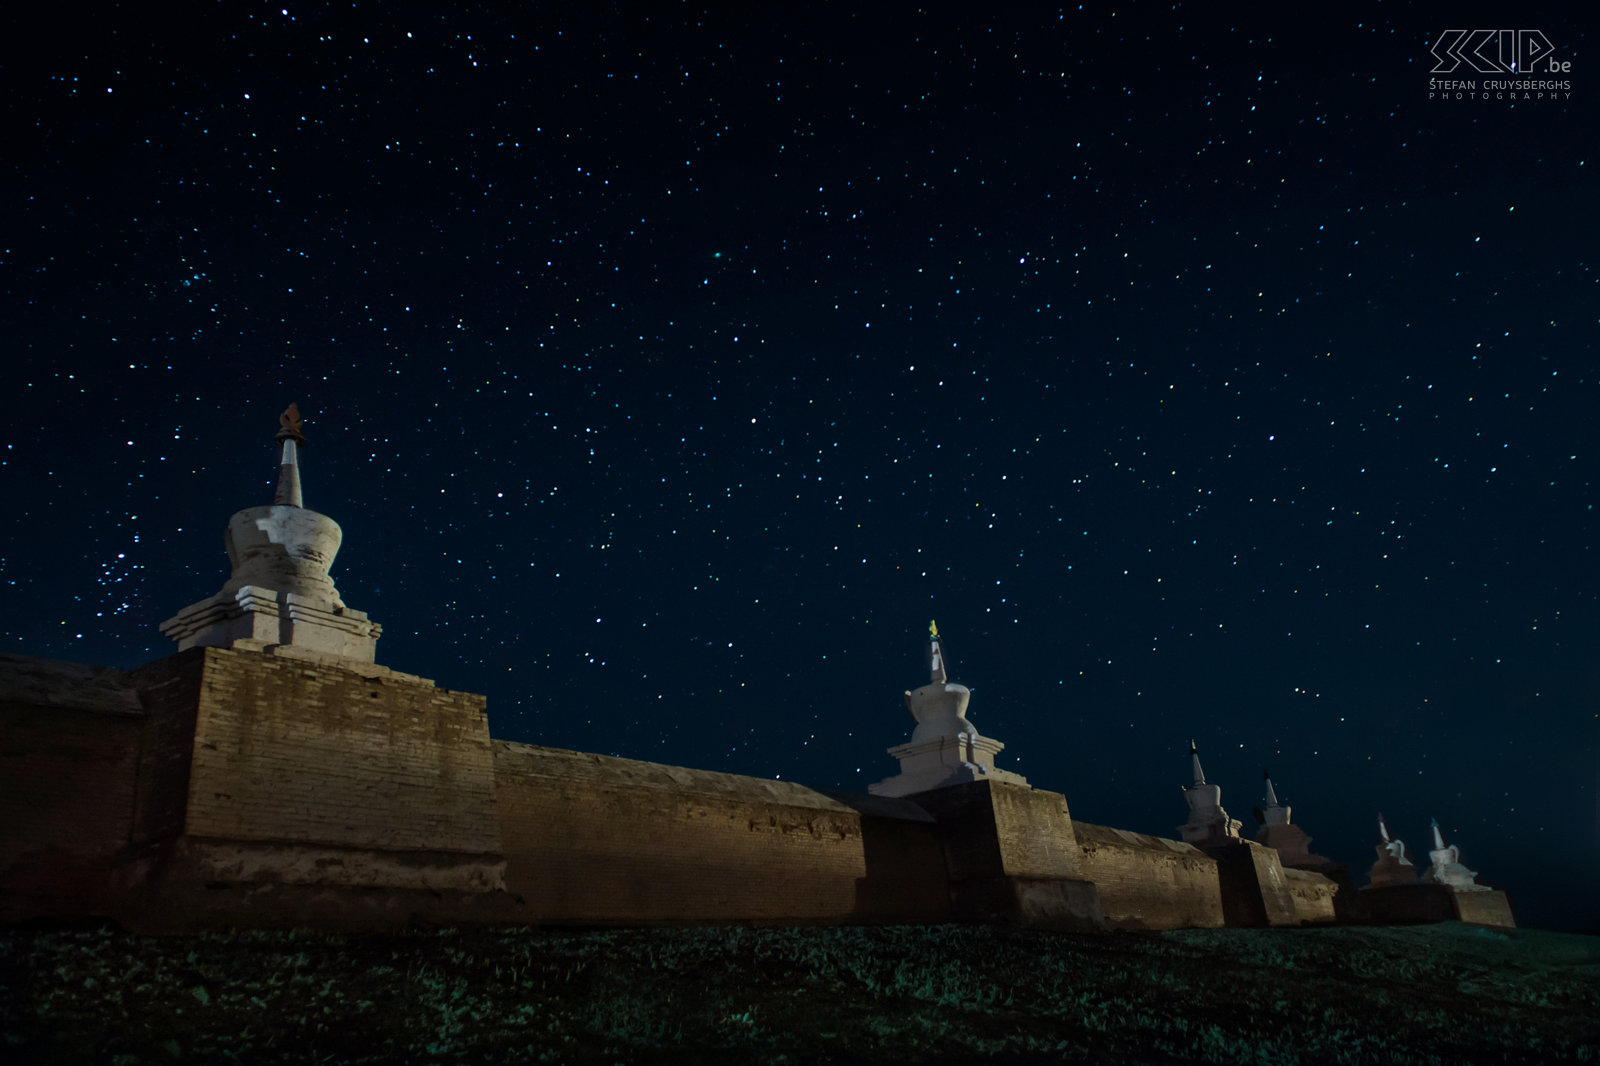 Kharkhorin - Erdene Zuu by night Night photo of Erdene Zuu in Kharkhorin/Karakorum in central Mongolia. Together with my girlfriend I returned in the evening to the great outer walls with stupas of this ancient Buddhist monastery. We tried to illuminate the stupas with our flashlight and tried to photograph the fantastic starry sky. Stefan Cruysberghs